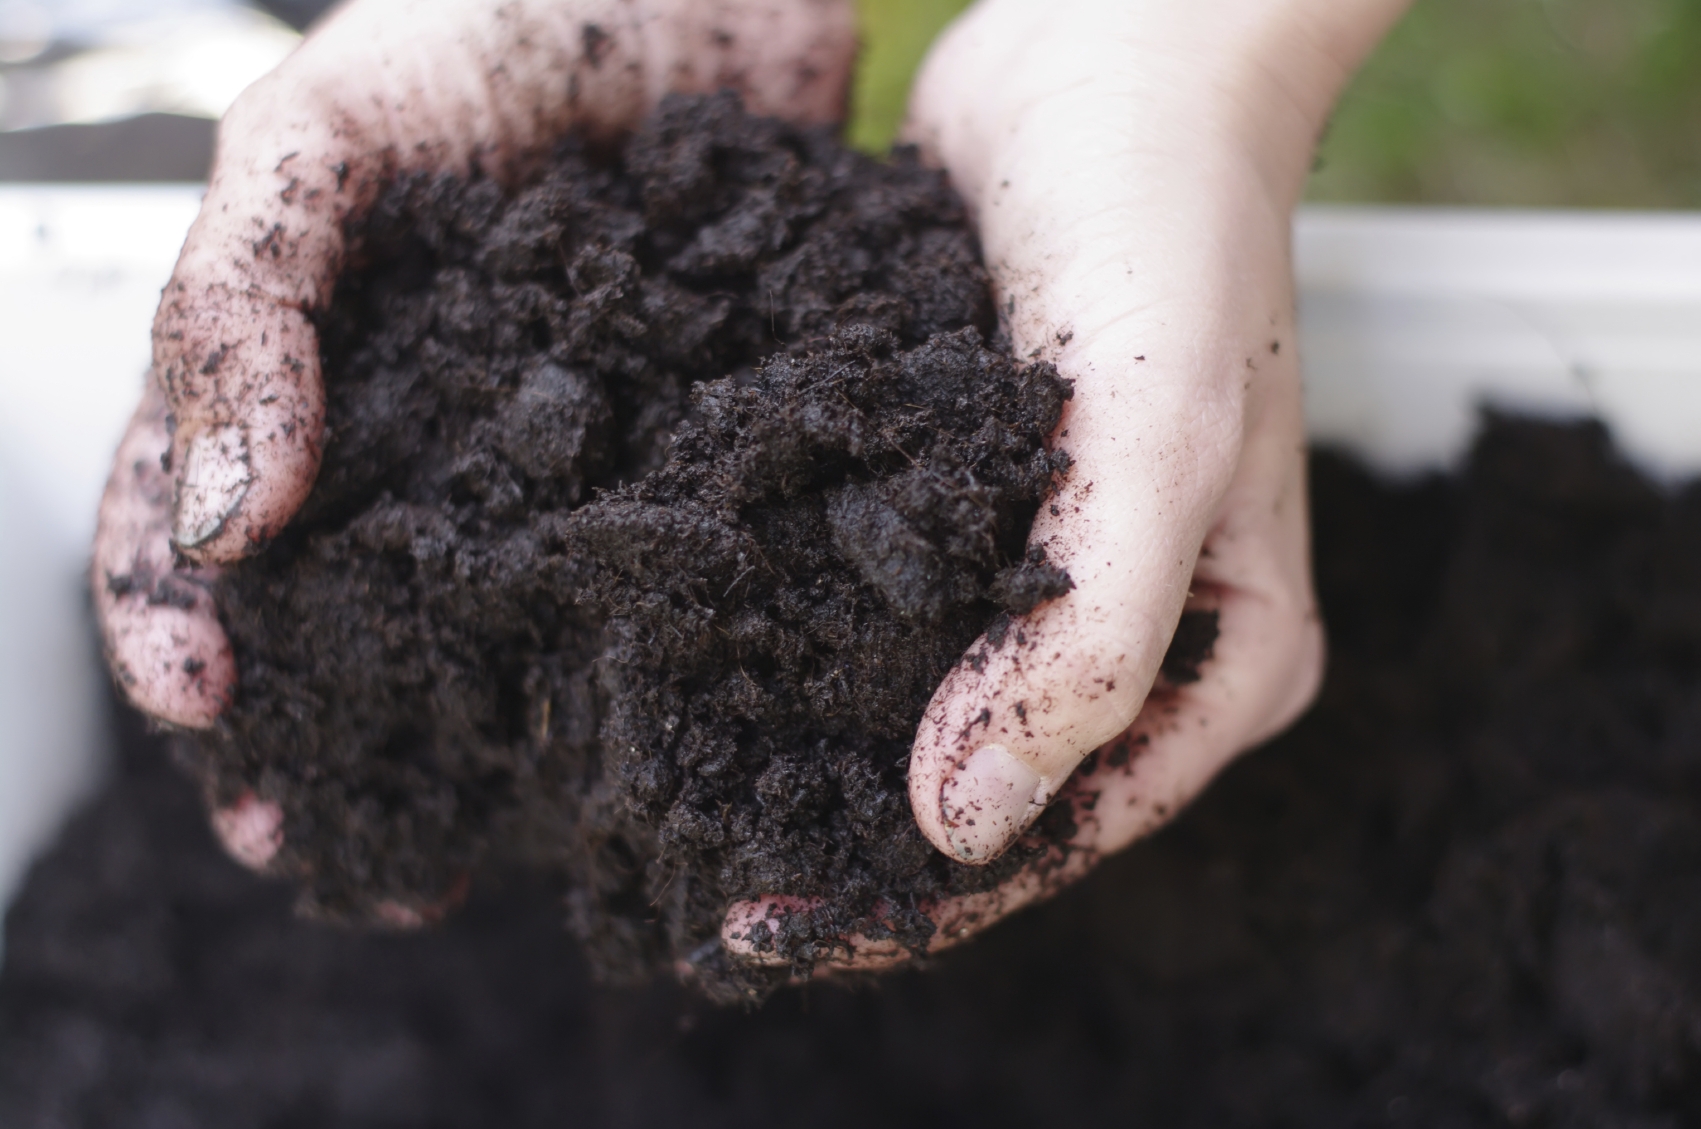 6 Types of Soil: How to Make the Most of Your Garden Soil?